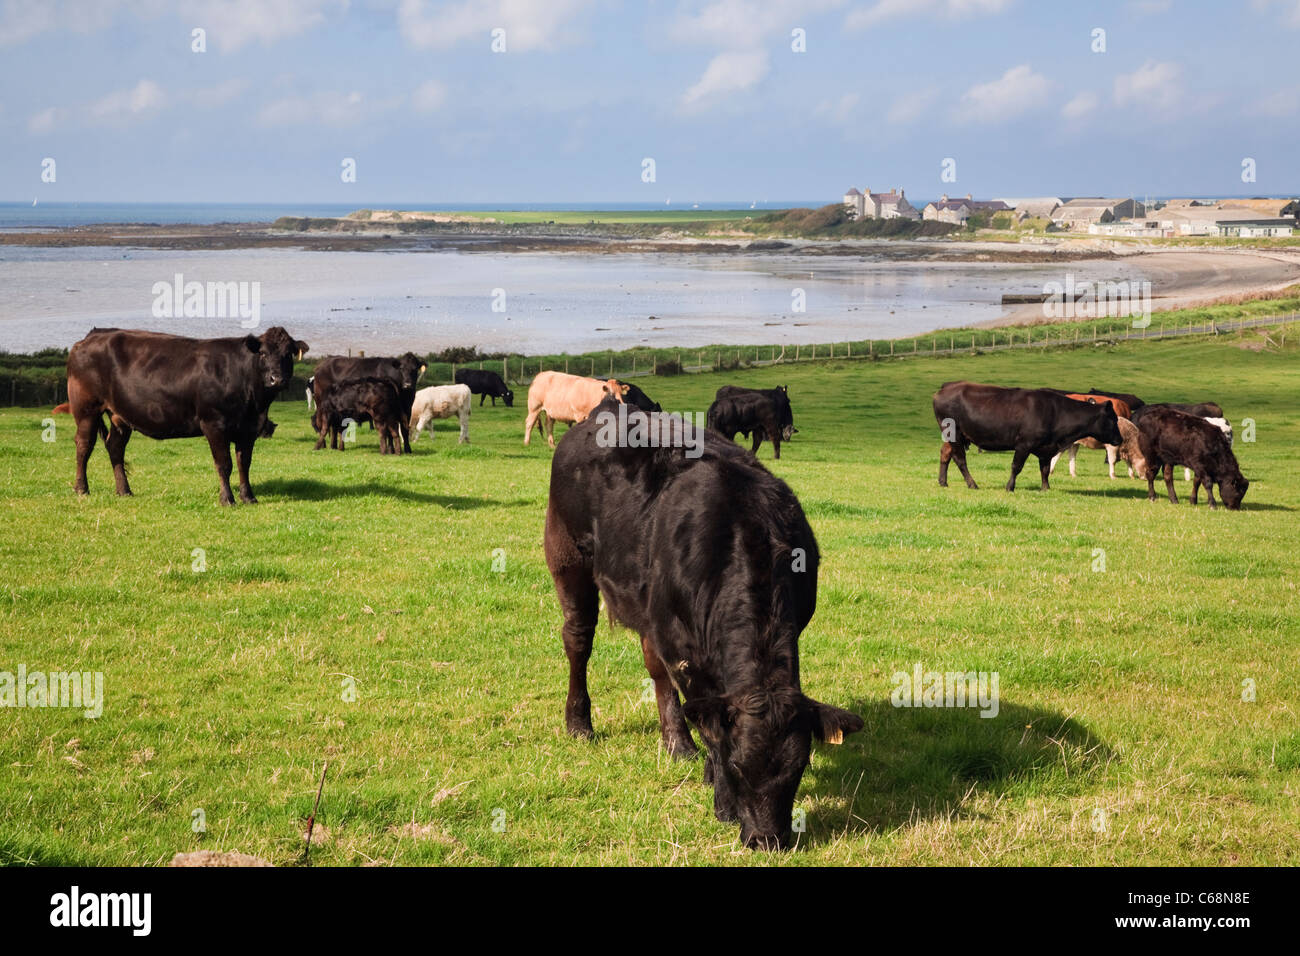 Pastoral scene with cattle in a field on coastal farm beside sea at Porth Penrhyn-Mawr, Llanfwrog, Isle of Anglesey, North Wales, UK Stock Photo